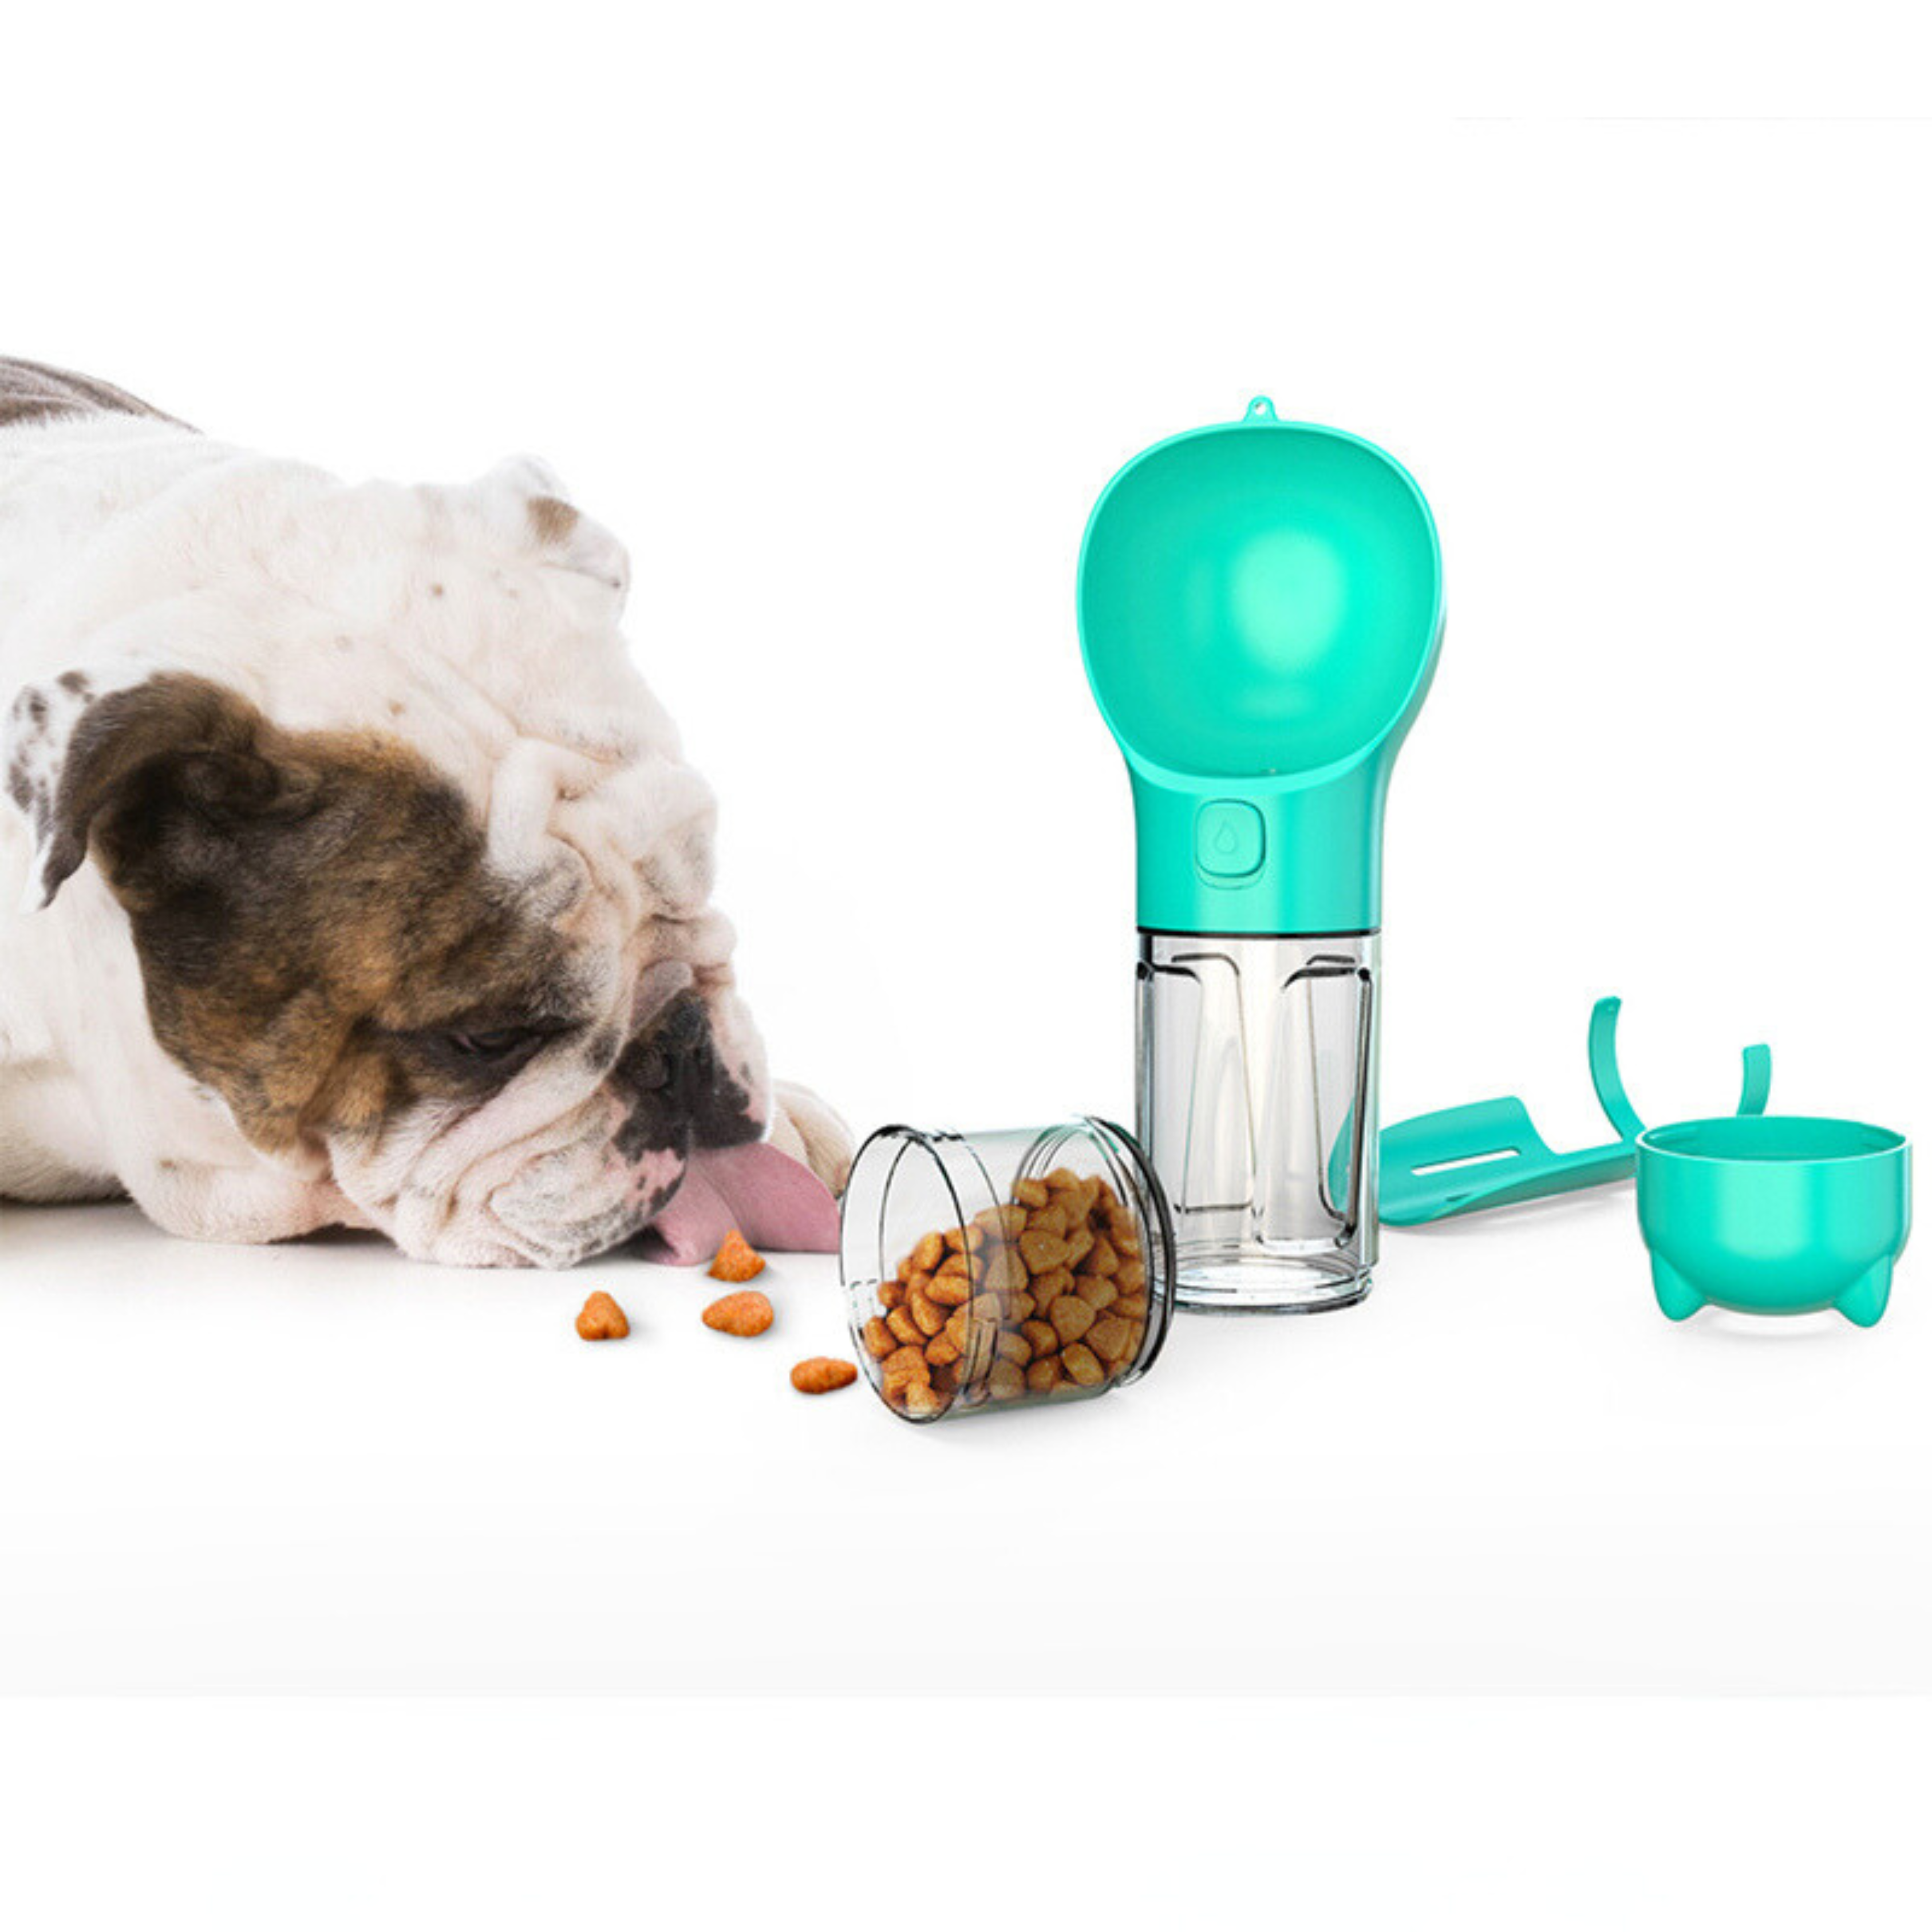 Tragbare 3 in 1 Hunde-Trinkflasche™